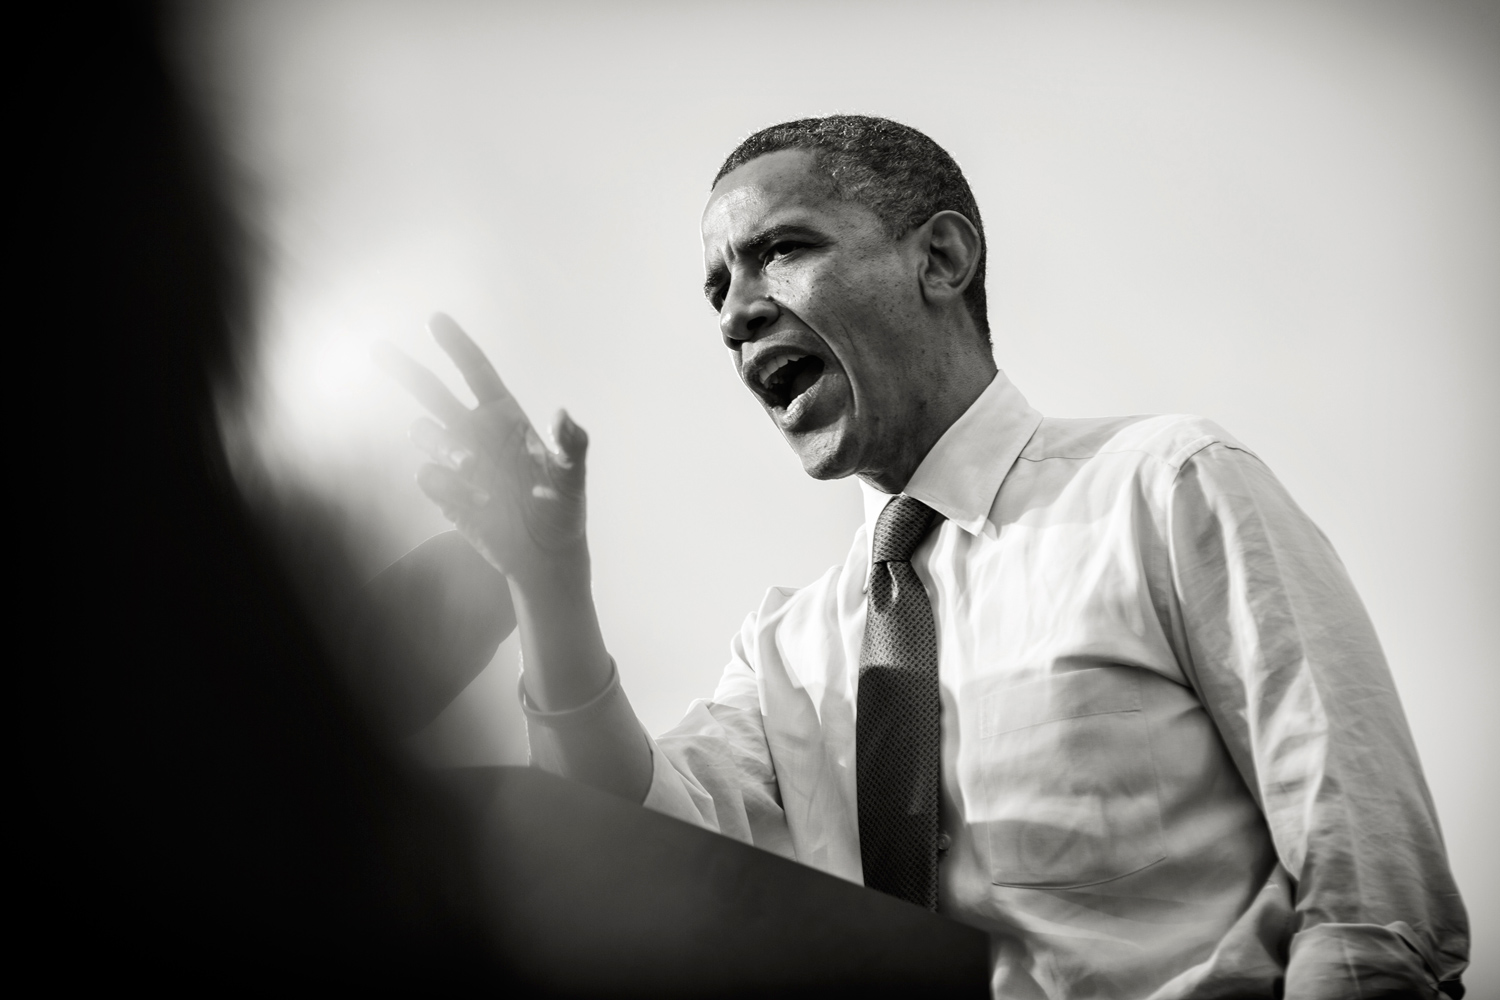 Oct. 24, 2012. President Obama attends a campaign rally in Denver.